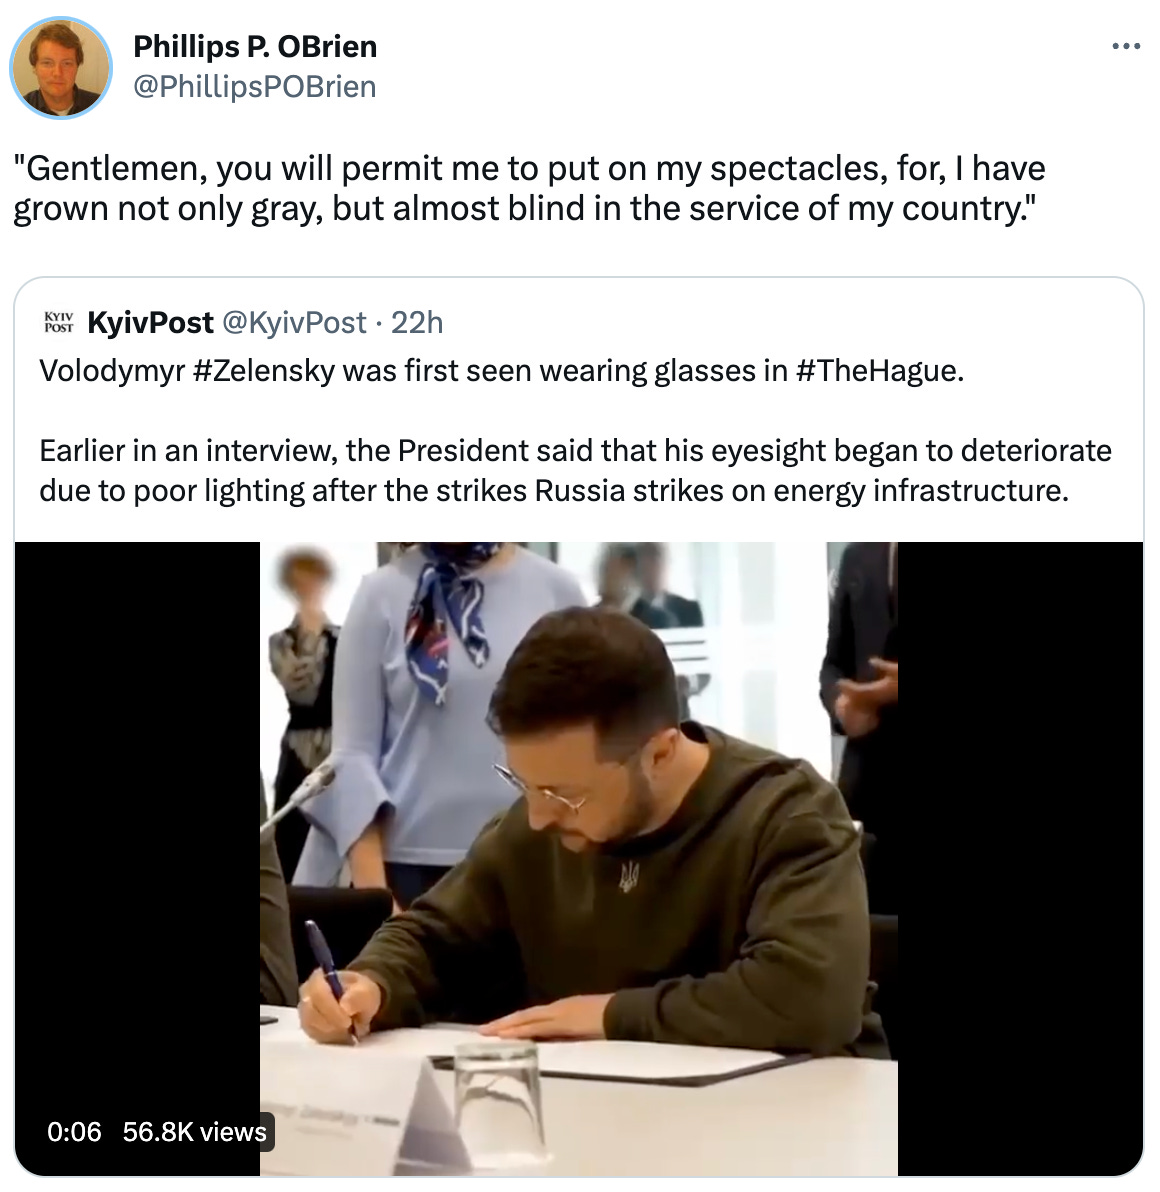  Phillips P. OBrien @PhillipsPOBrien "Gentlemen, you will permit me to put on my spectacles, for, I have grown not only gray, but almost blind in the service of my country." Quote Tweet KyivPost @KyivPost · 22h Volodymyr #Zelensky was first seen wearing glasses in #TheHague.  Earlier in an interview, the President said that his eyesight began to deteriorate due to poor lighting after the strikes Russia strikes on energy infrastructure.